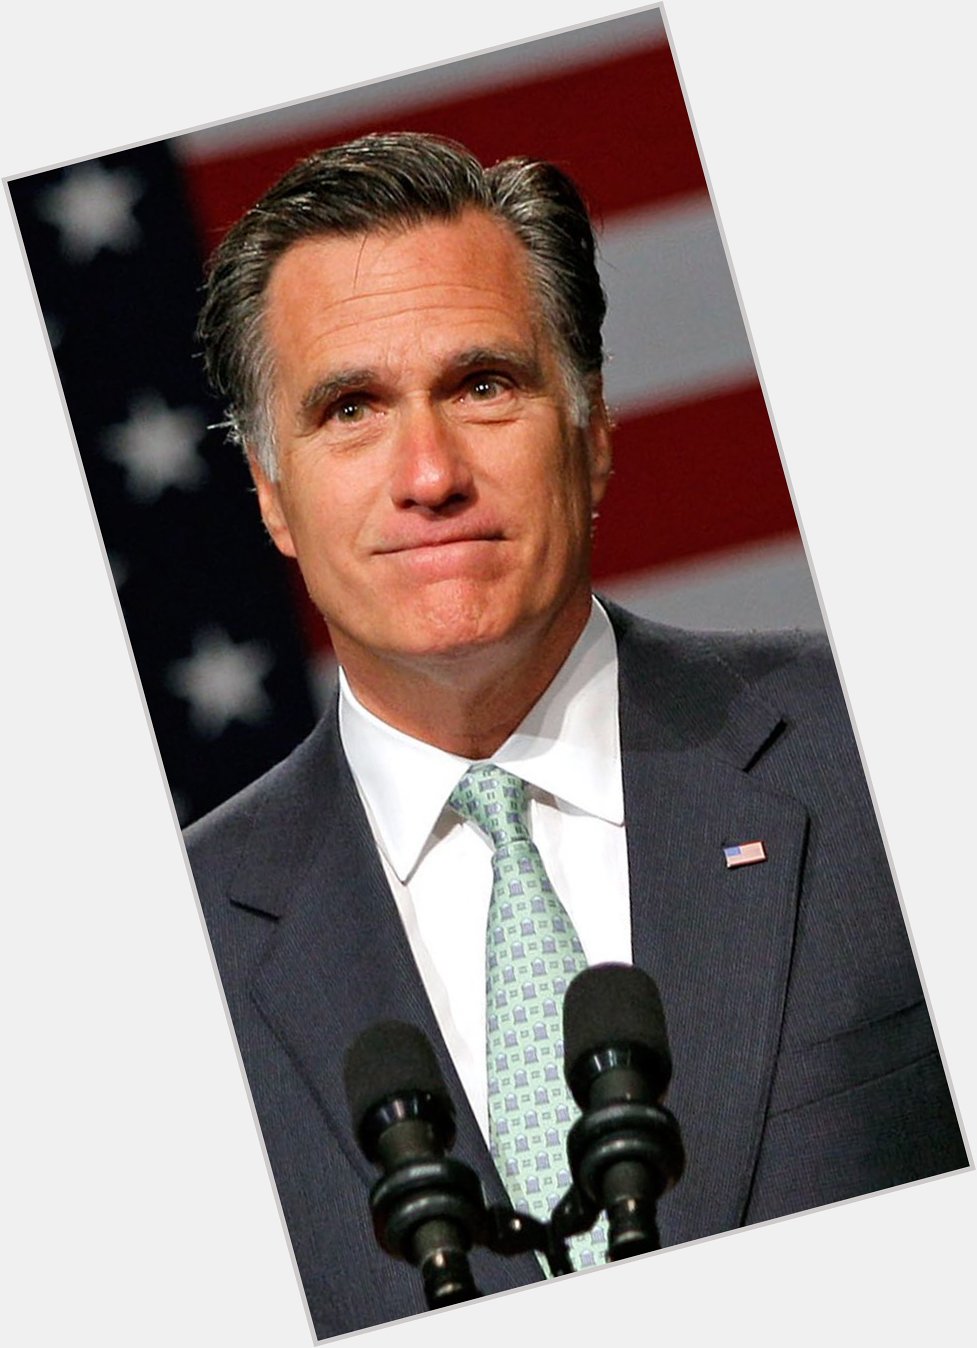 Happy birthday my gift to you is this series of mitt romney pictures 